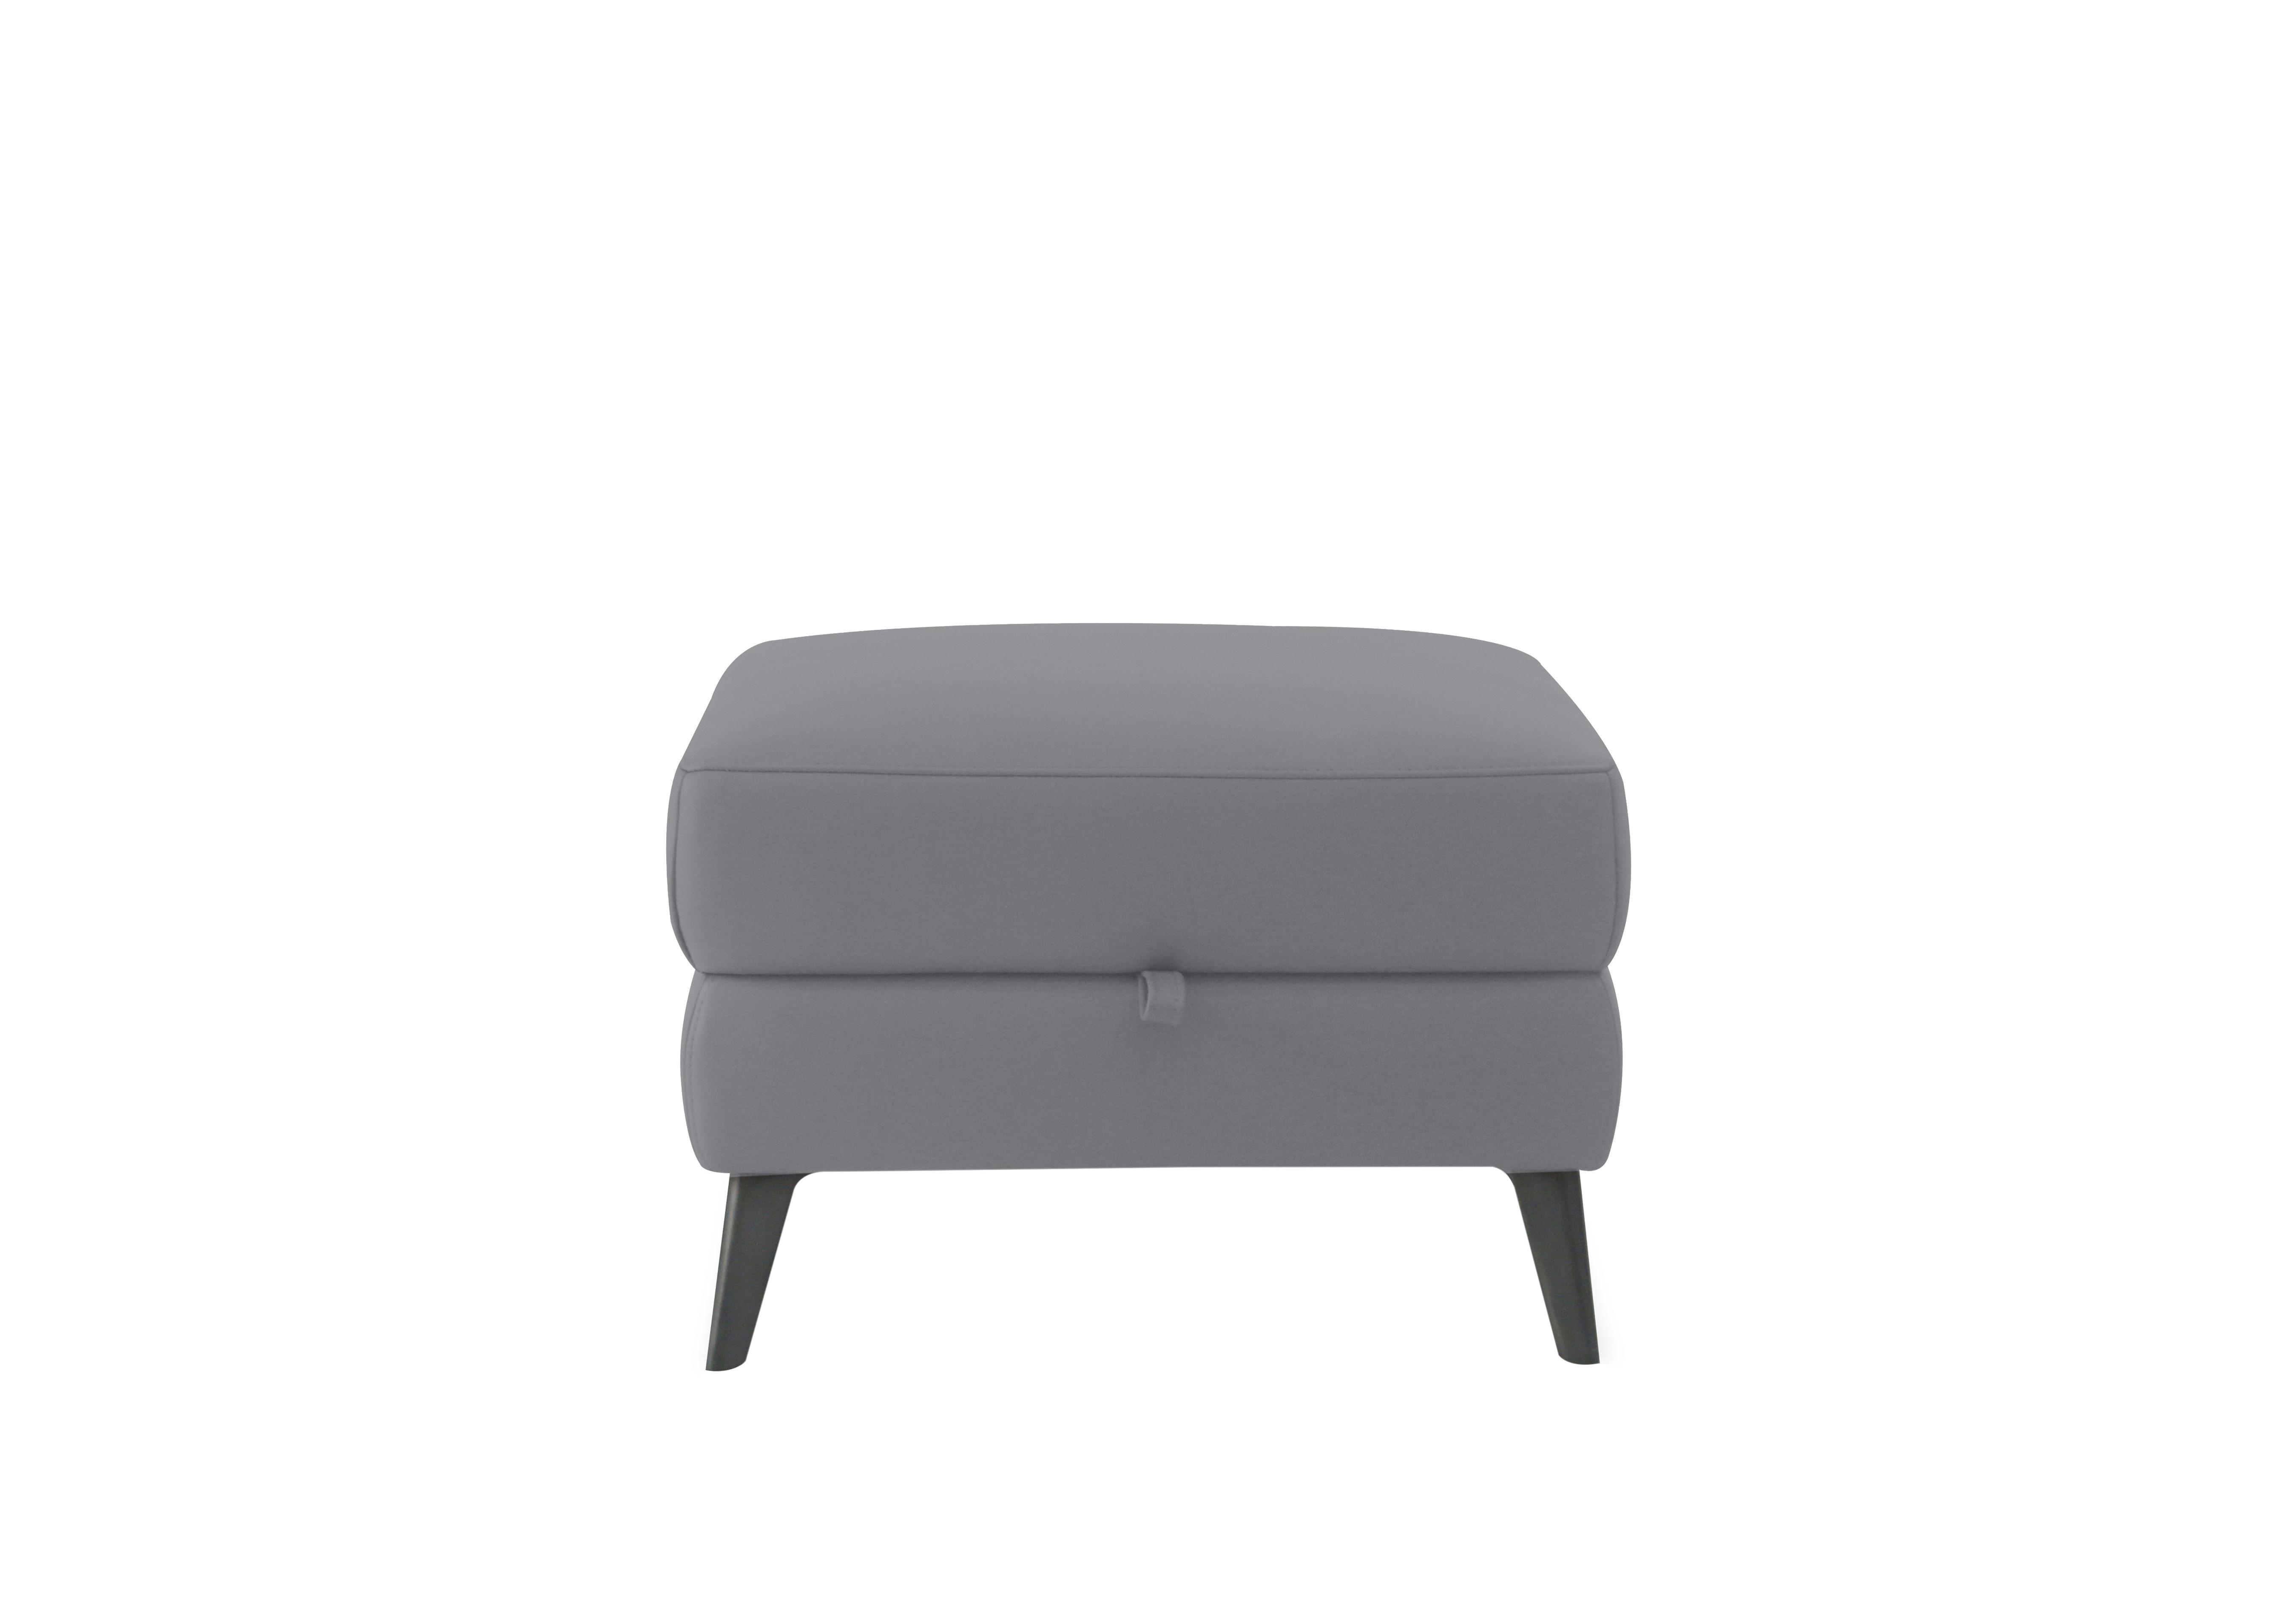 Maddox Leather Storage Footstool in Np-605e Paloma Grey on Furniture Village